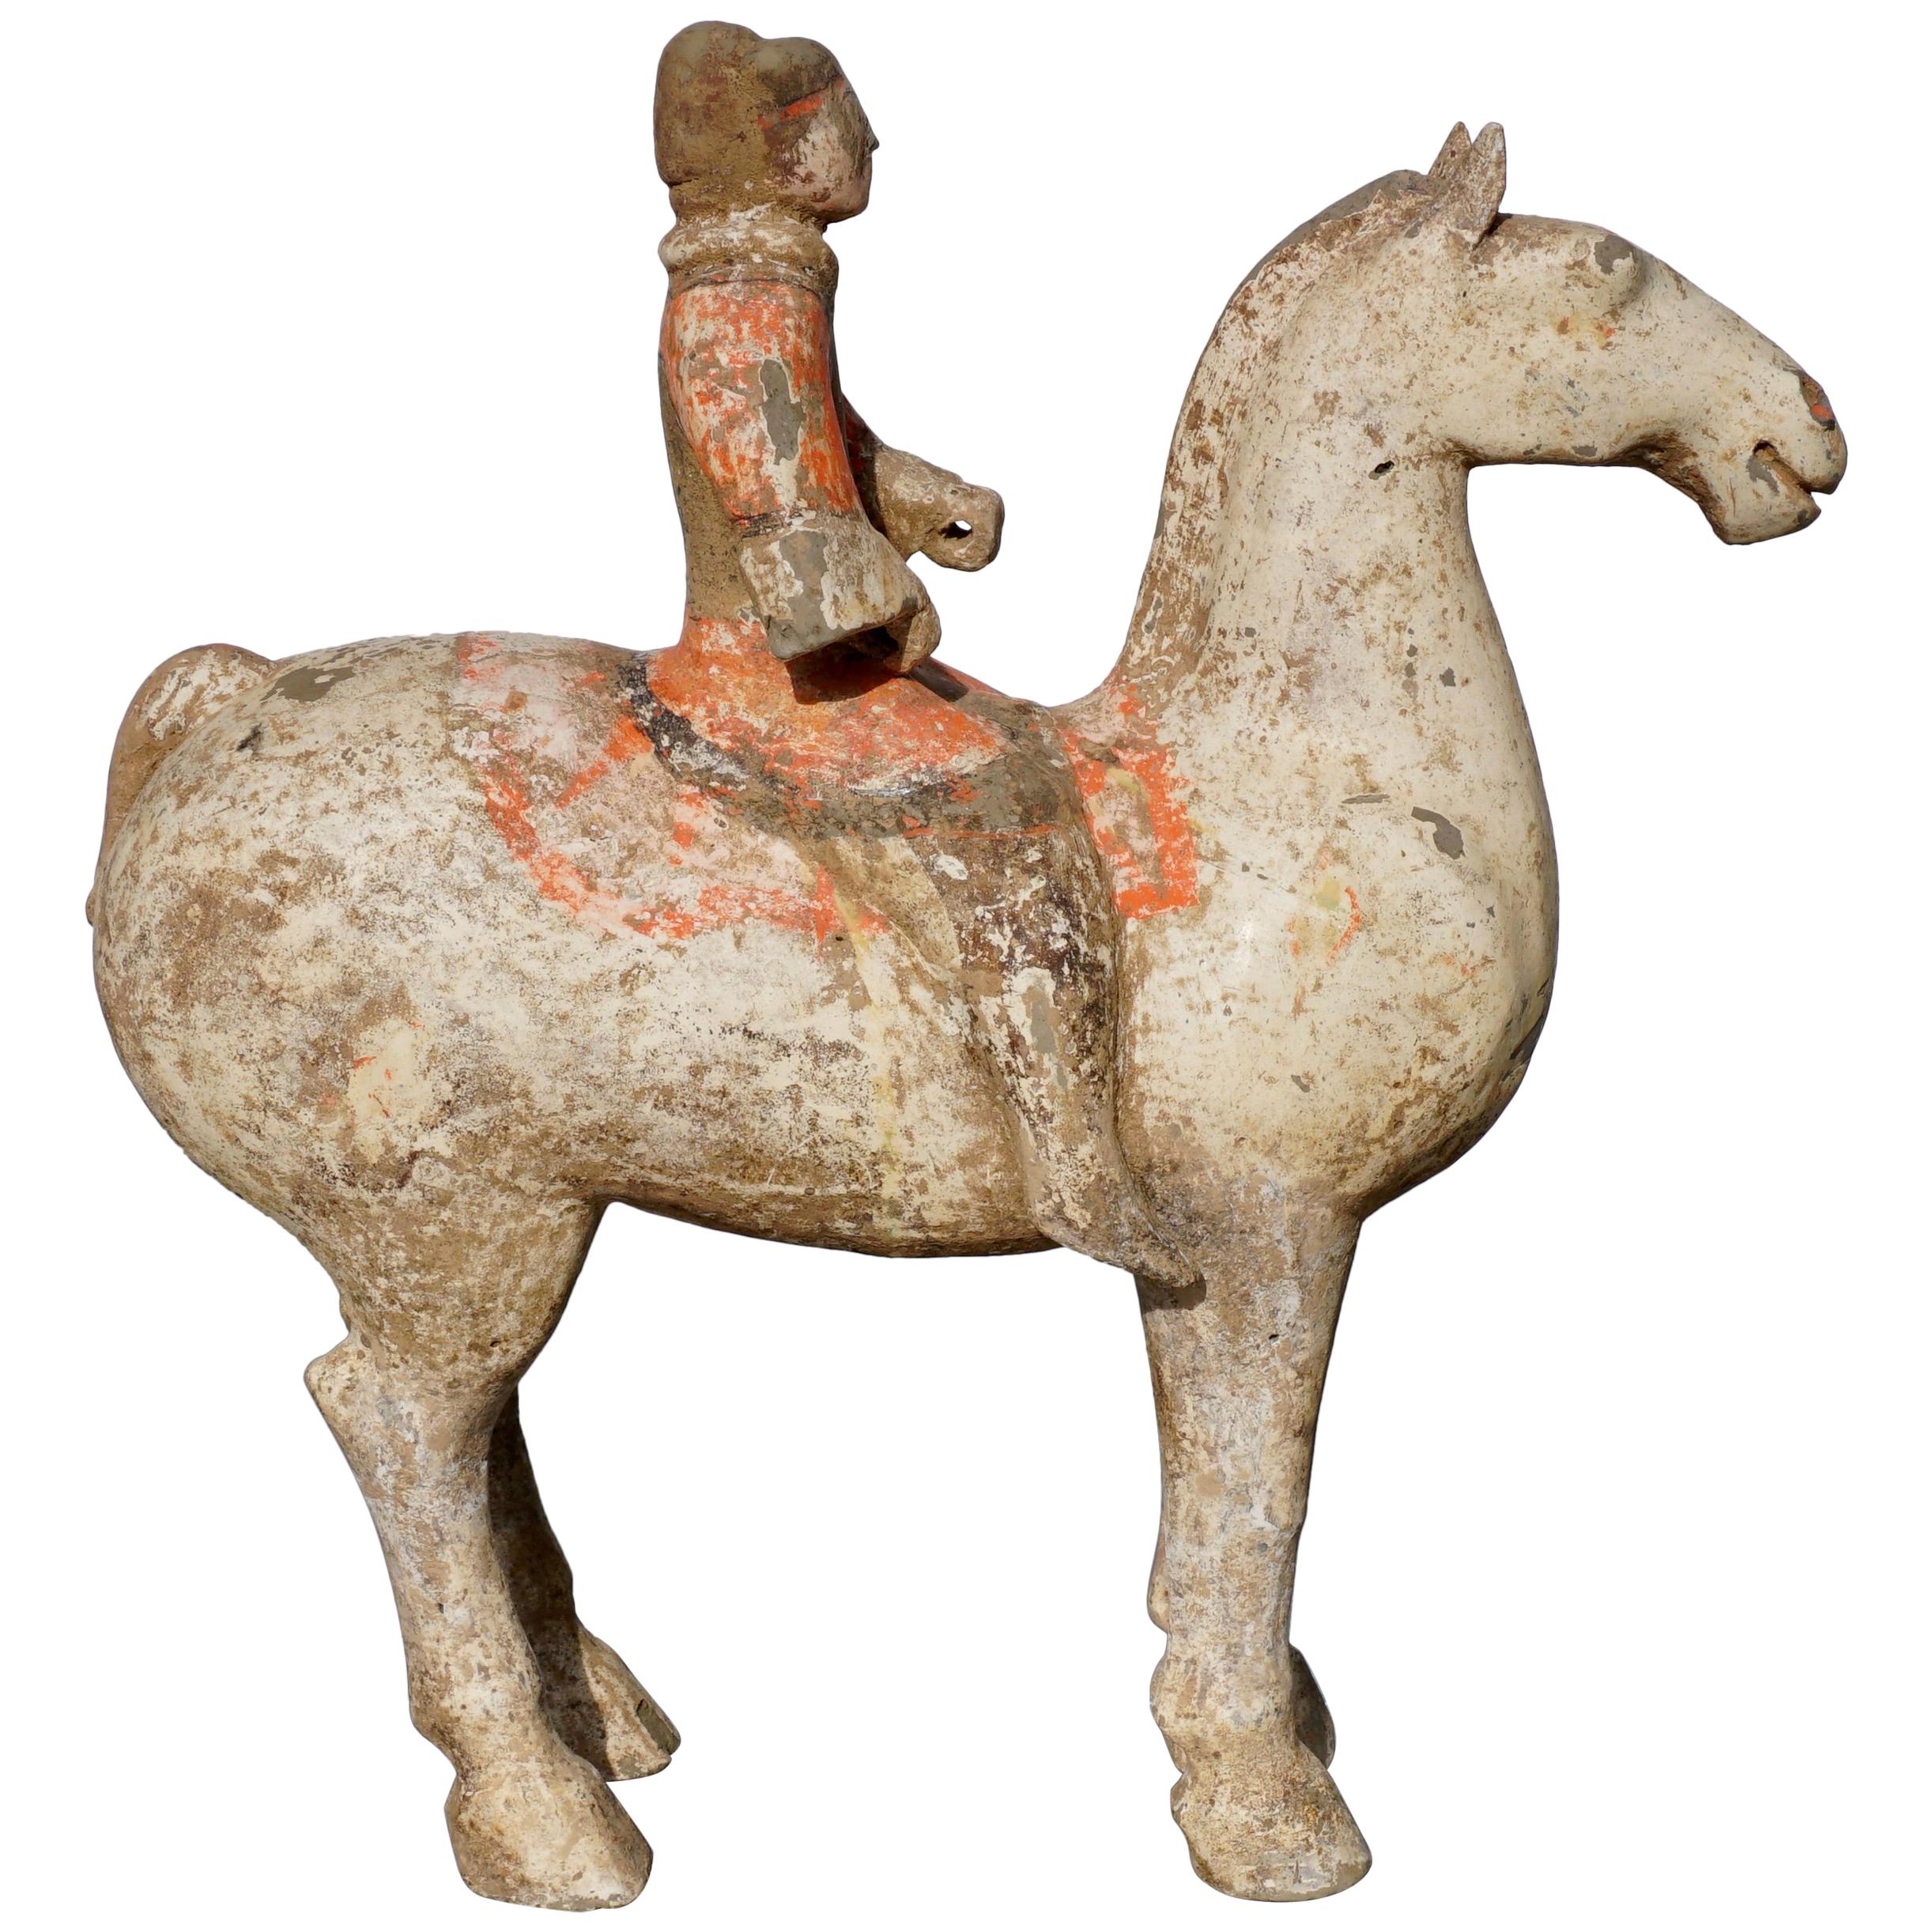 Han Dynasty Horse and Rider Terracotta, 206 BC-220 AD